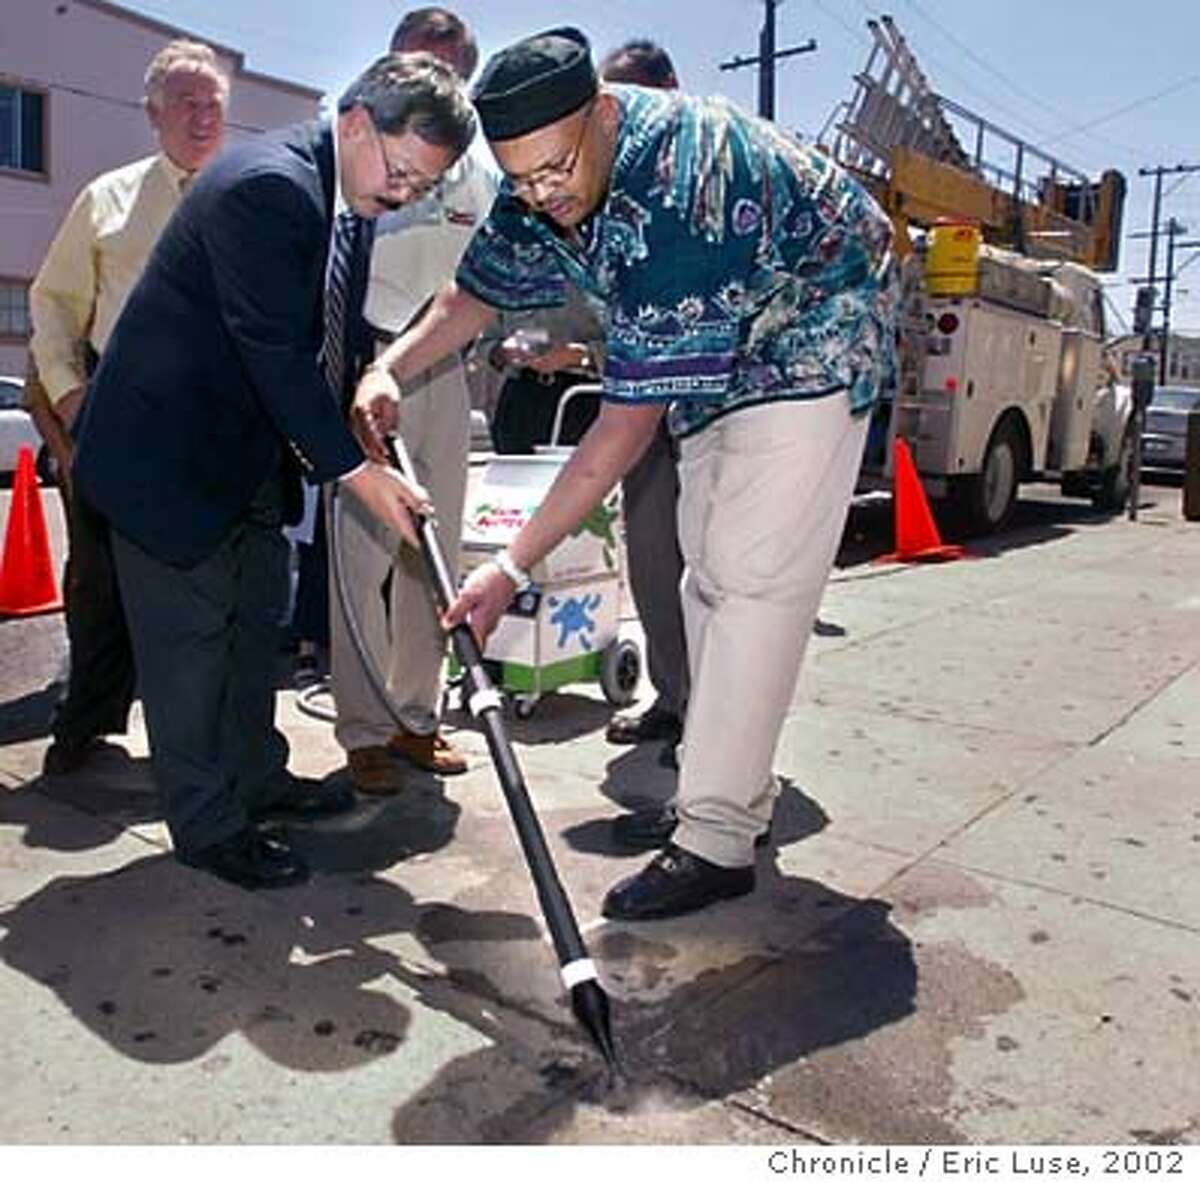 GUM-C-22JUL02-MT-EL Ed Lee , Director of Public Works along with the Deputy Director of Operations Mohammed Nuru work on their technique with the Gum Buster GUMCART. According to Nuru DPW is very excited about this new technology and will be recommending its use. BY ERIC LUSE/THE CHRONICLE